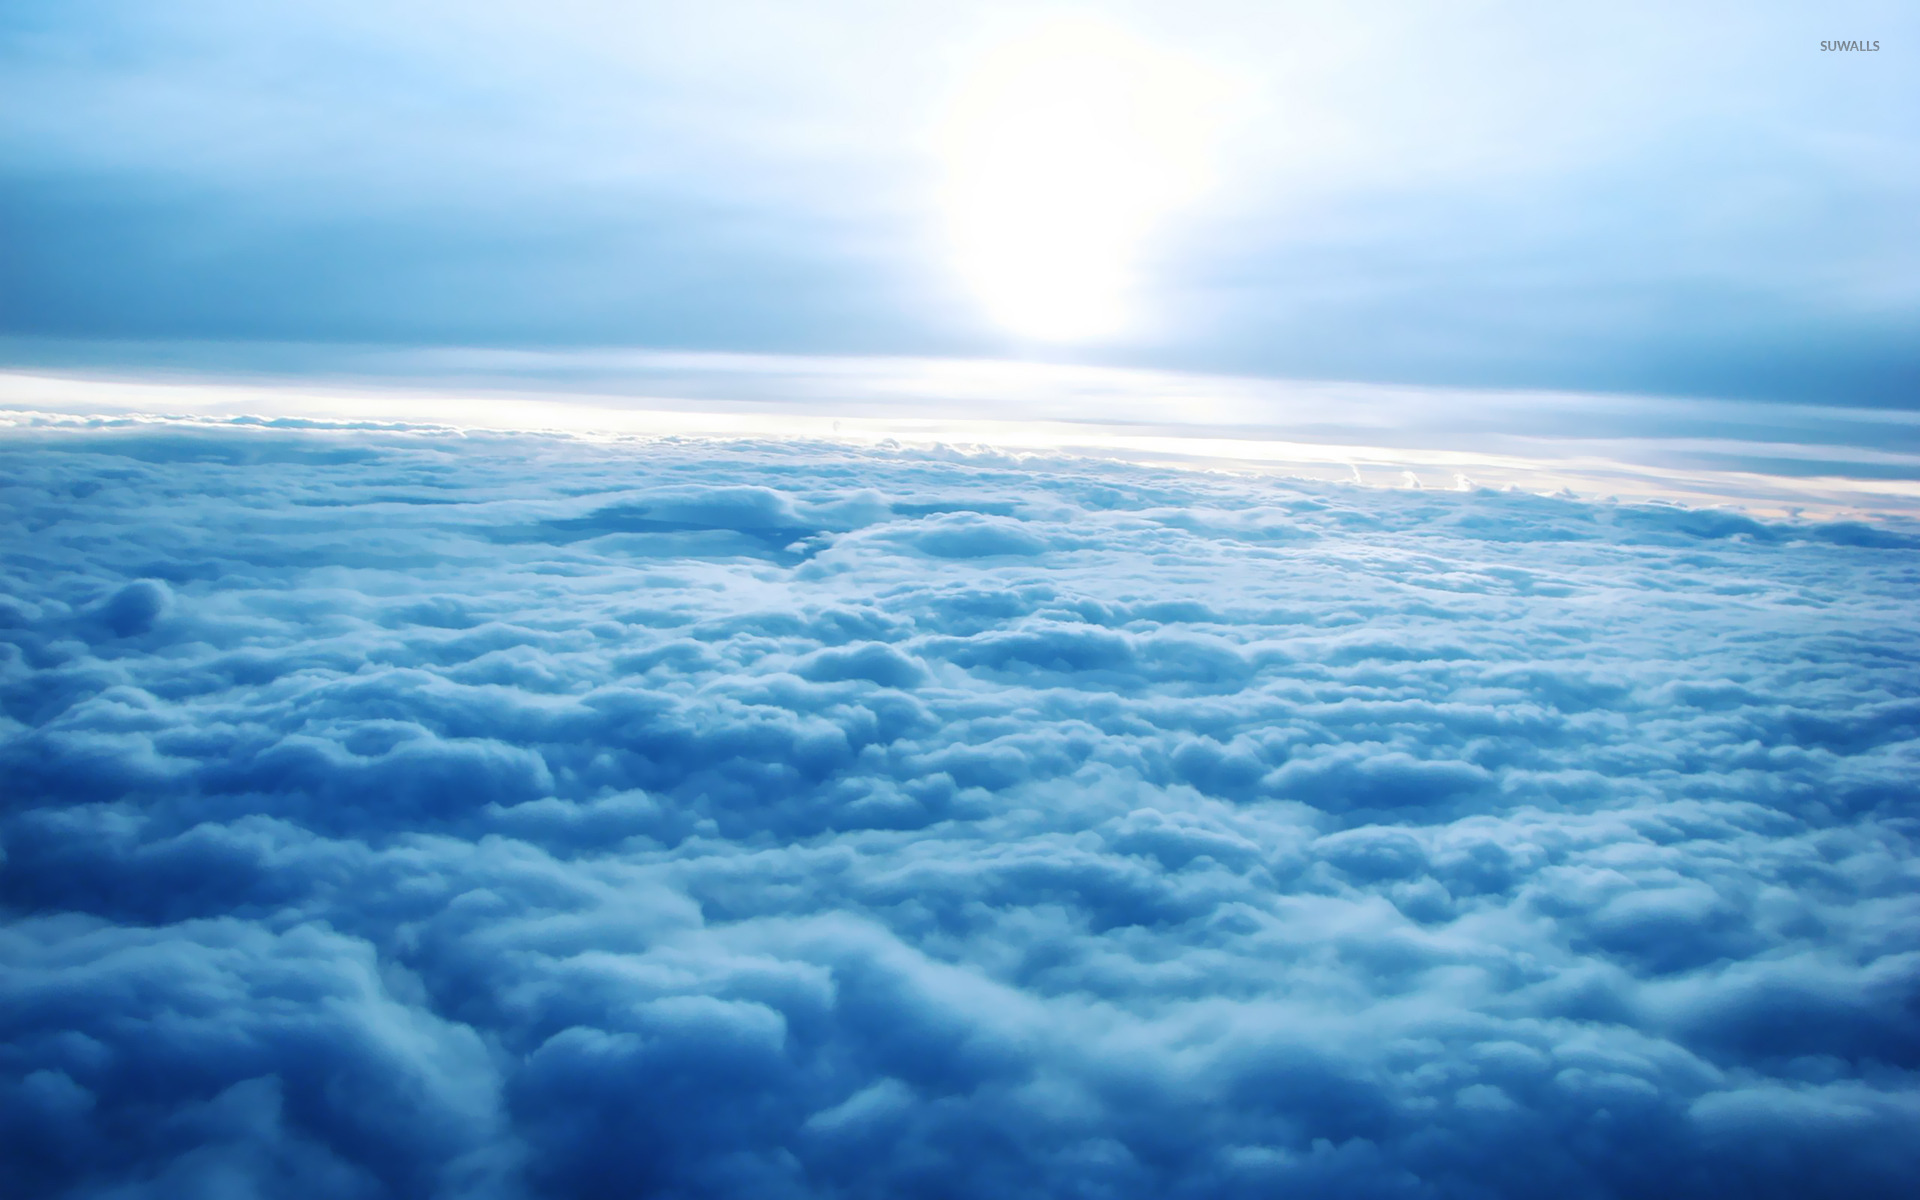 Sunrise over the clouds wallpaper - Nature wallpapers - #14800